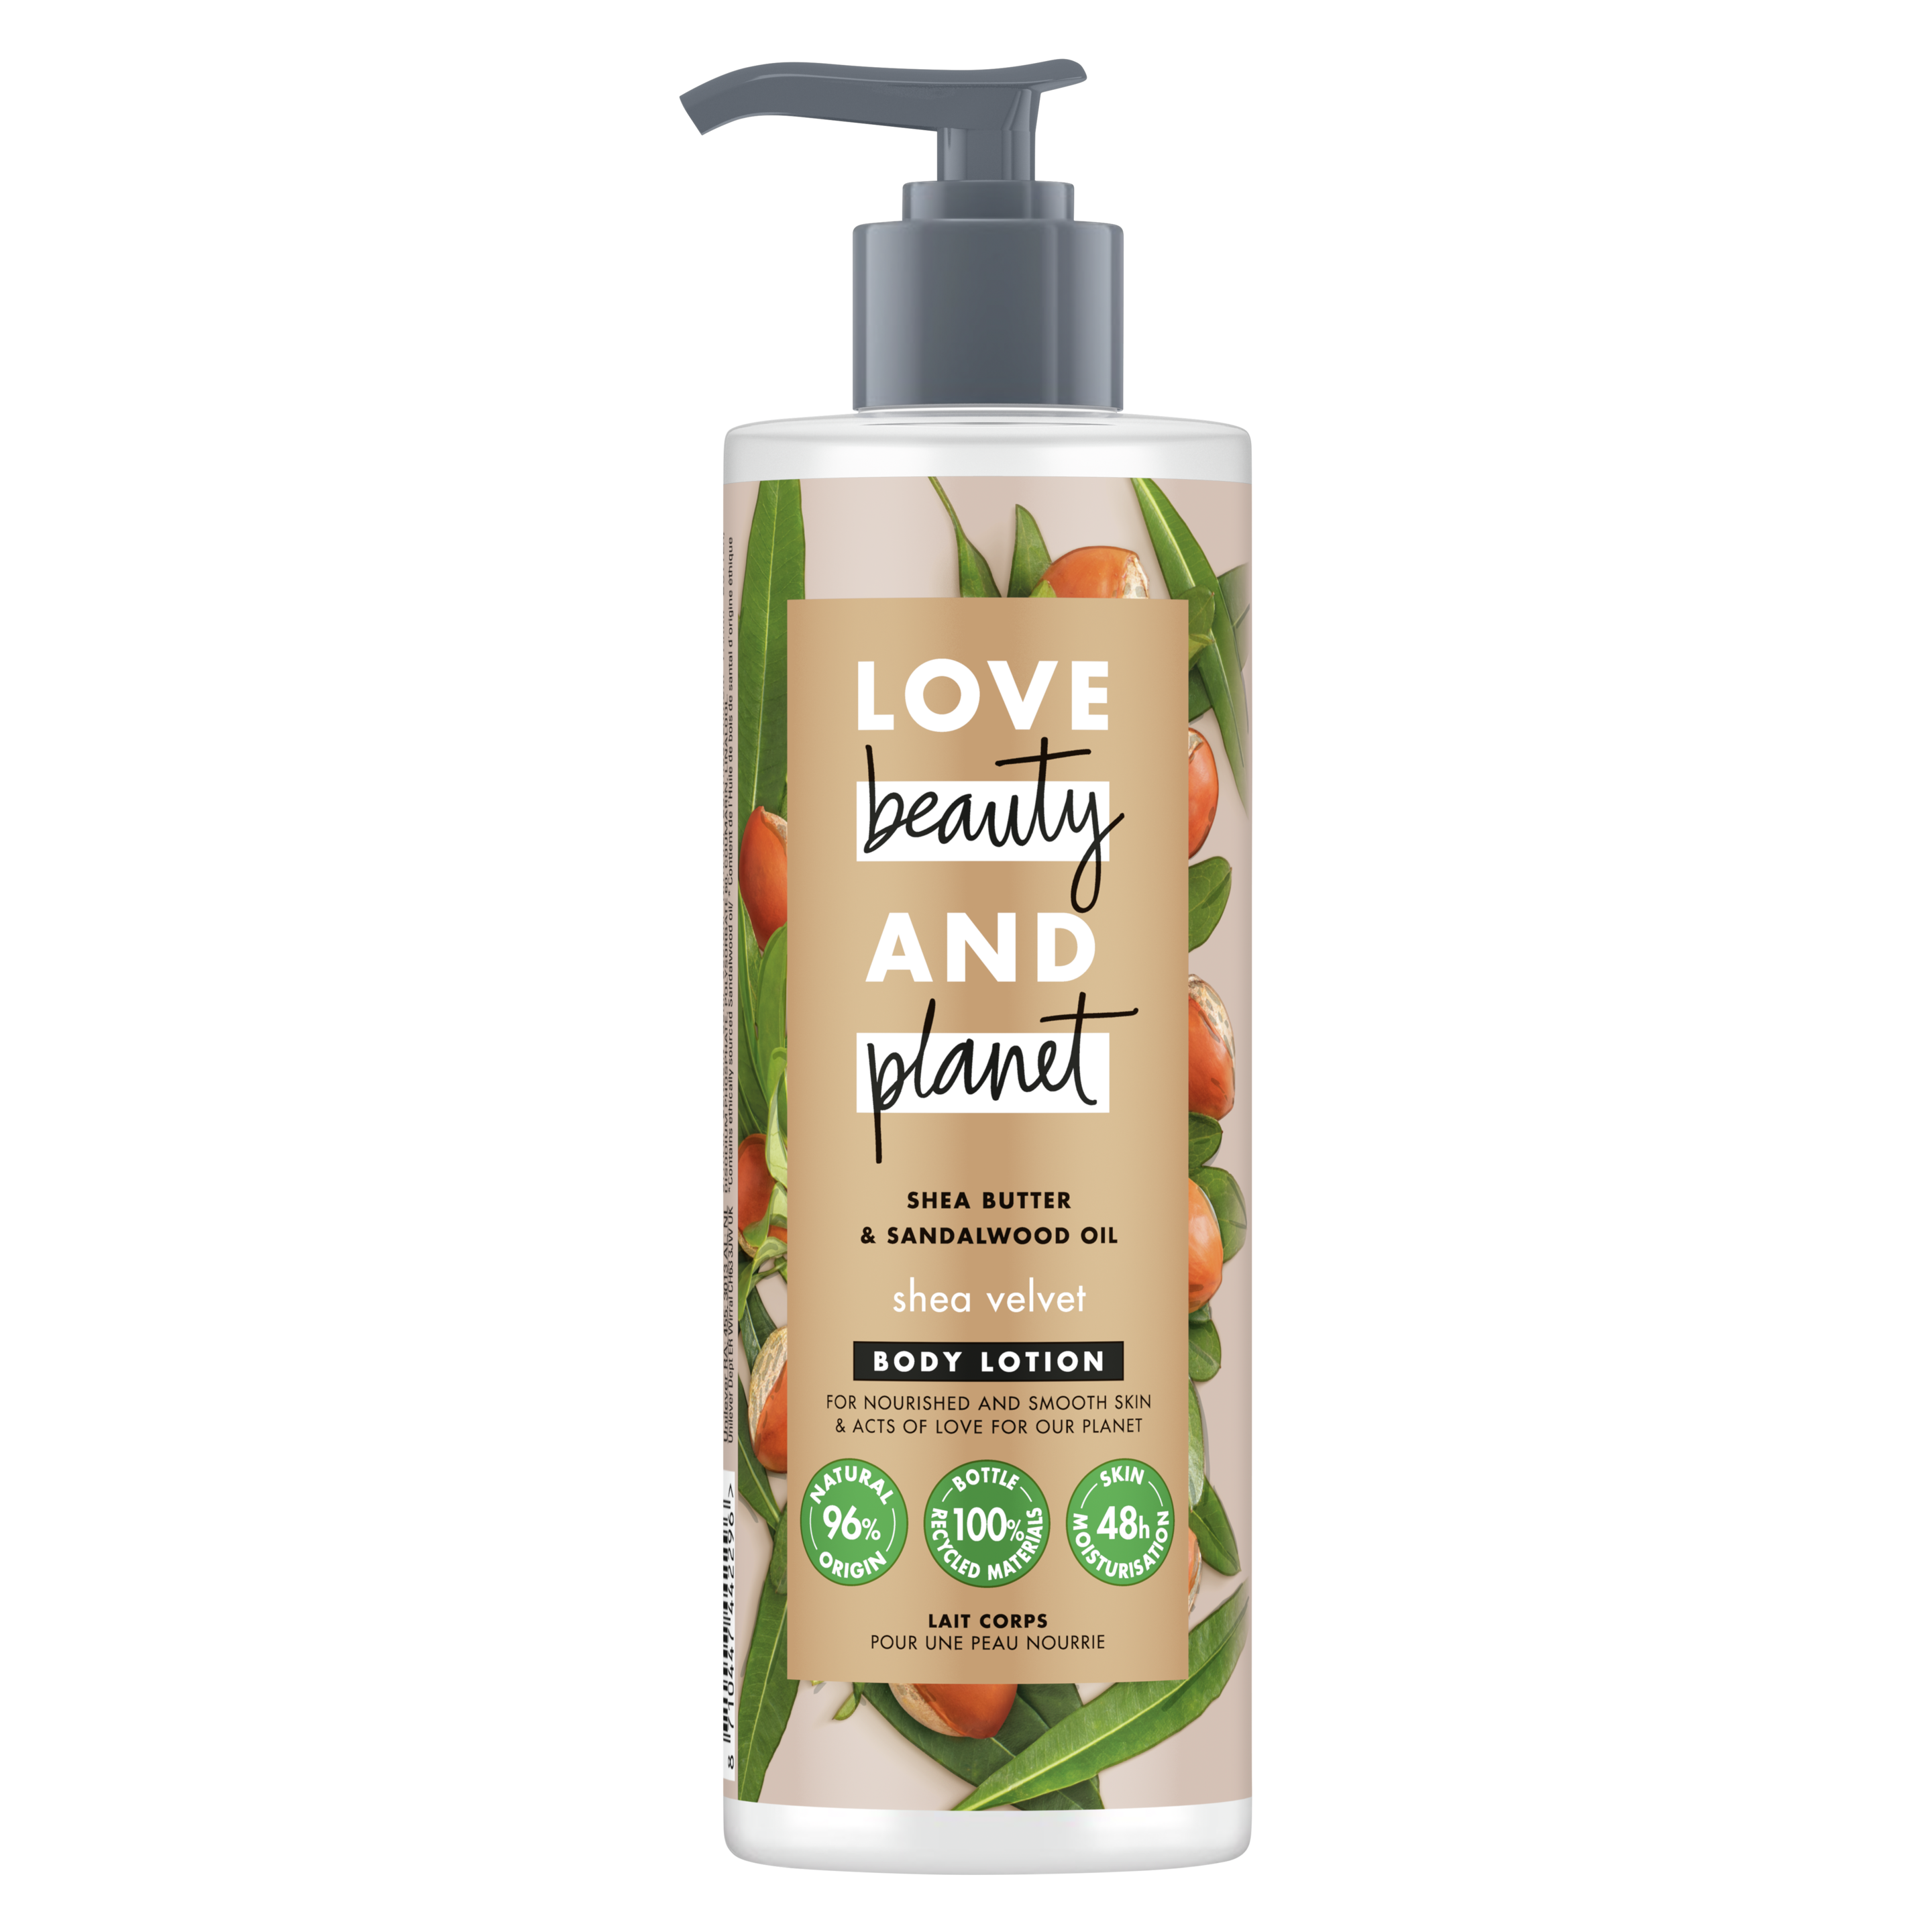 shea butter & sandalwood body lotion Text